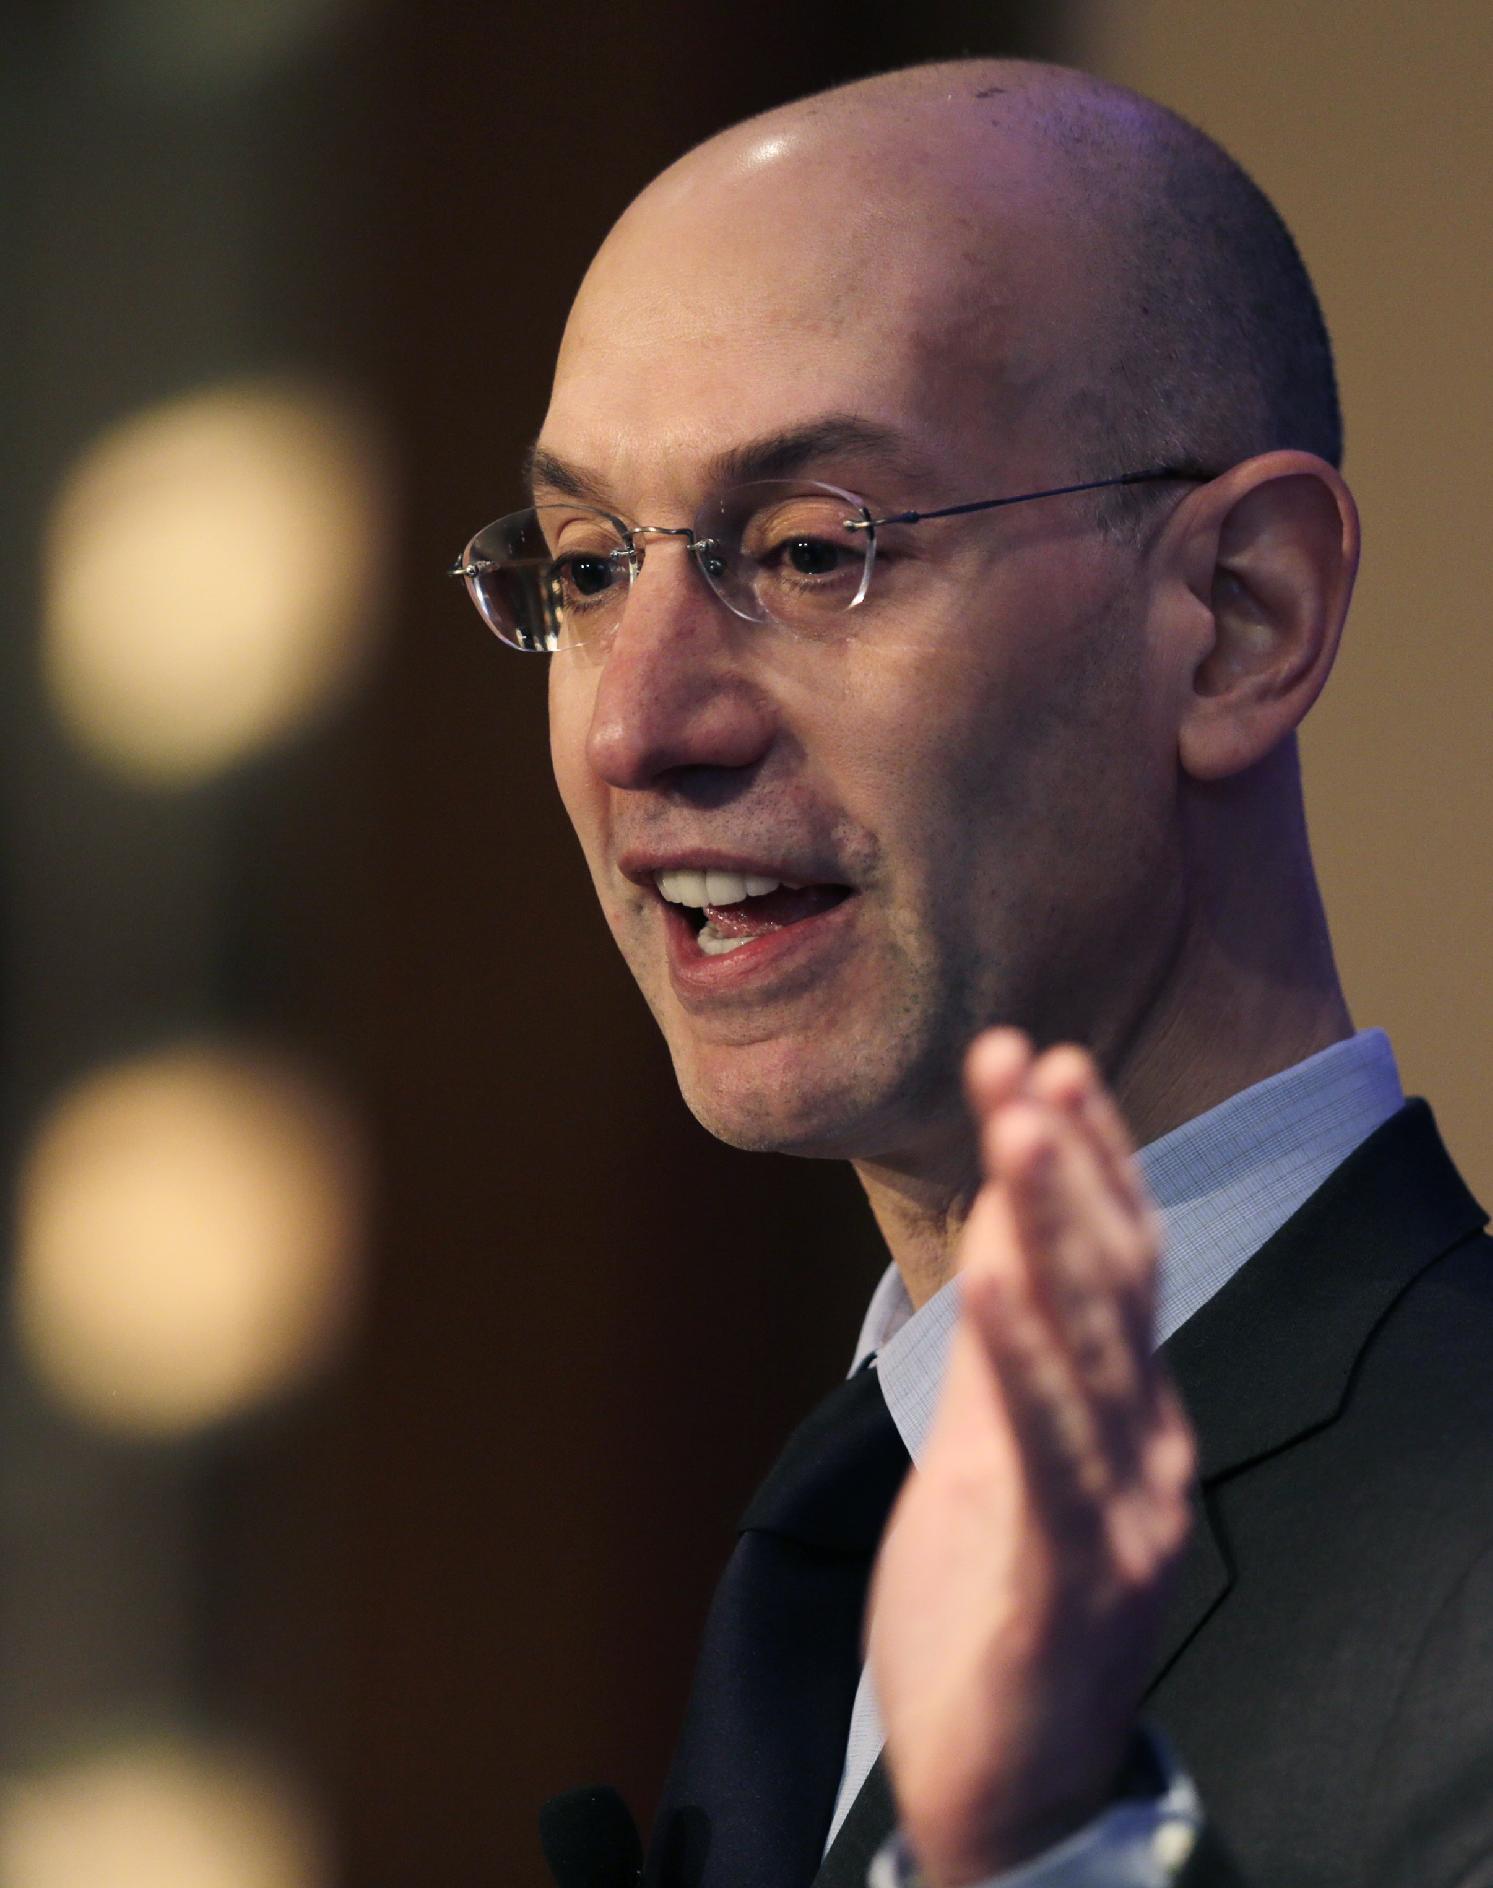 NBA commissioner Adam Silver gestures during an address, Wednesday, March 12, 2014, in Boston. Silver commented on some teams with losing records 